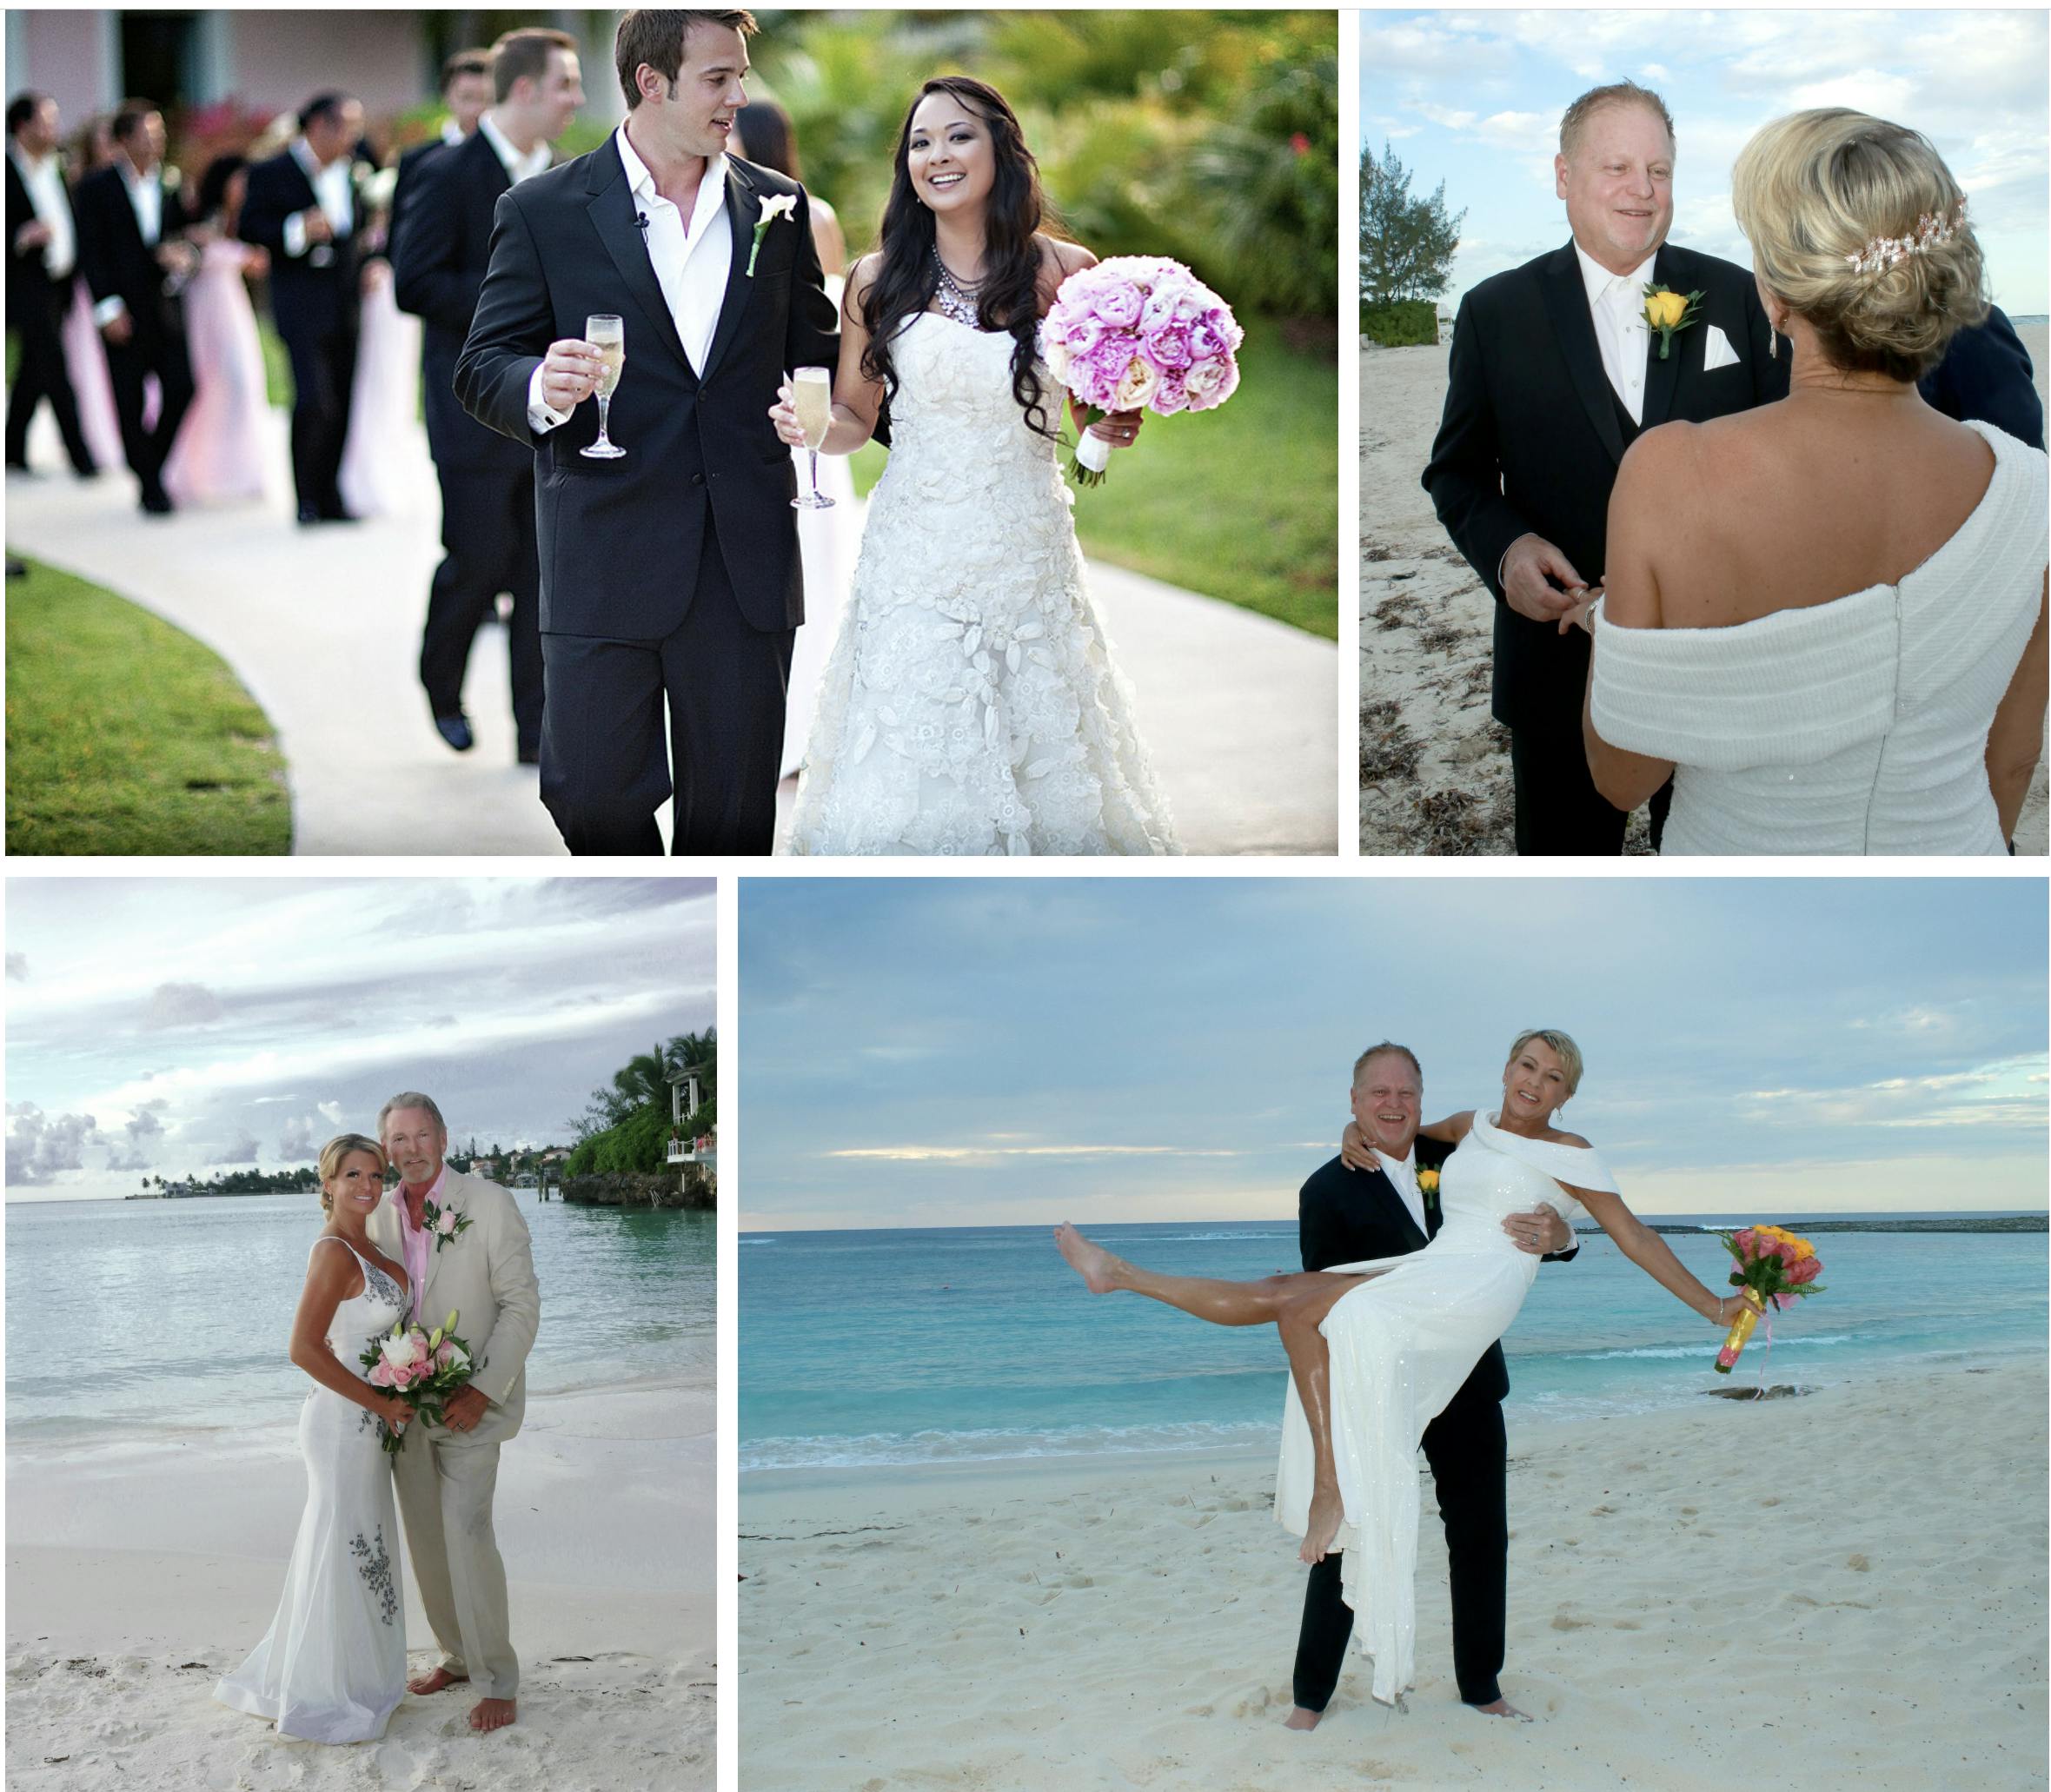 getting married in the Bahamas